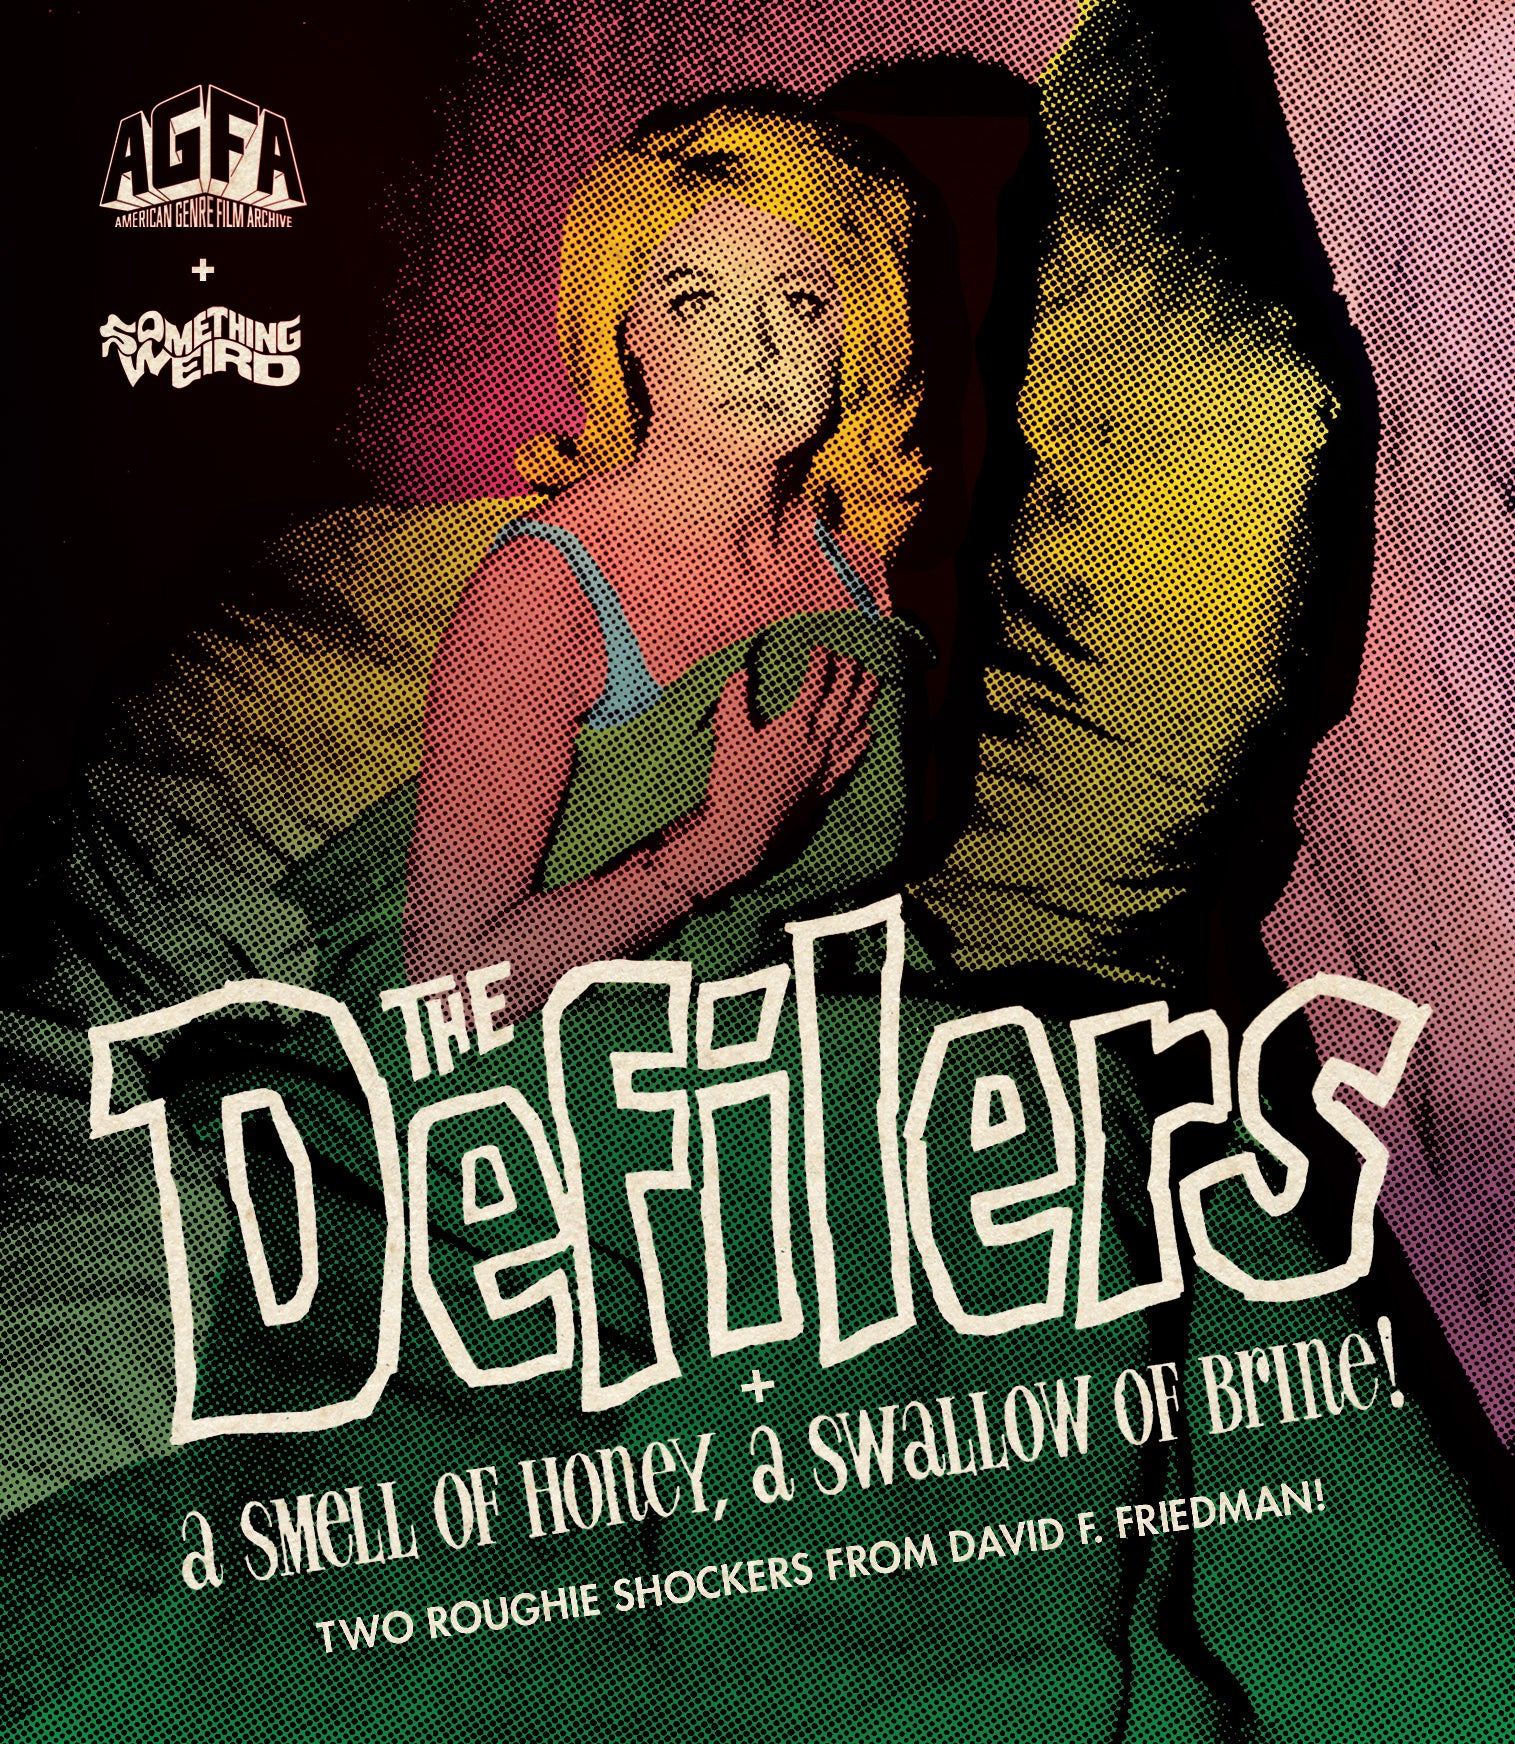 THE DEFILERS / A SMELL OF HONEY, A SWALLOW OF BRINE BLU-RAY